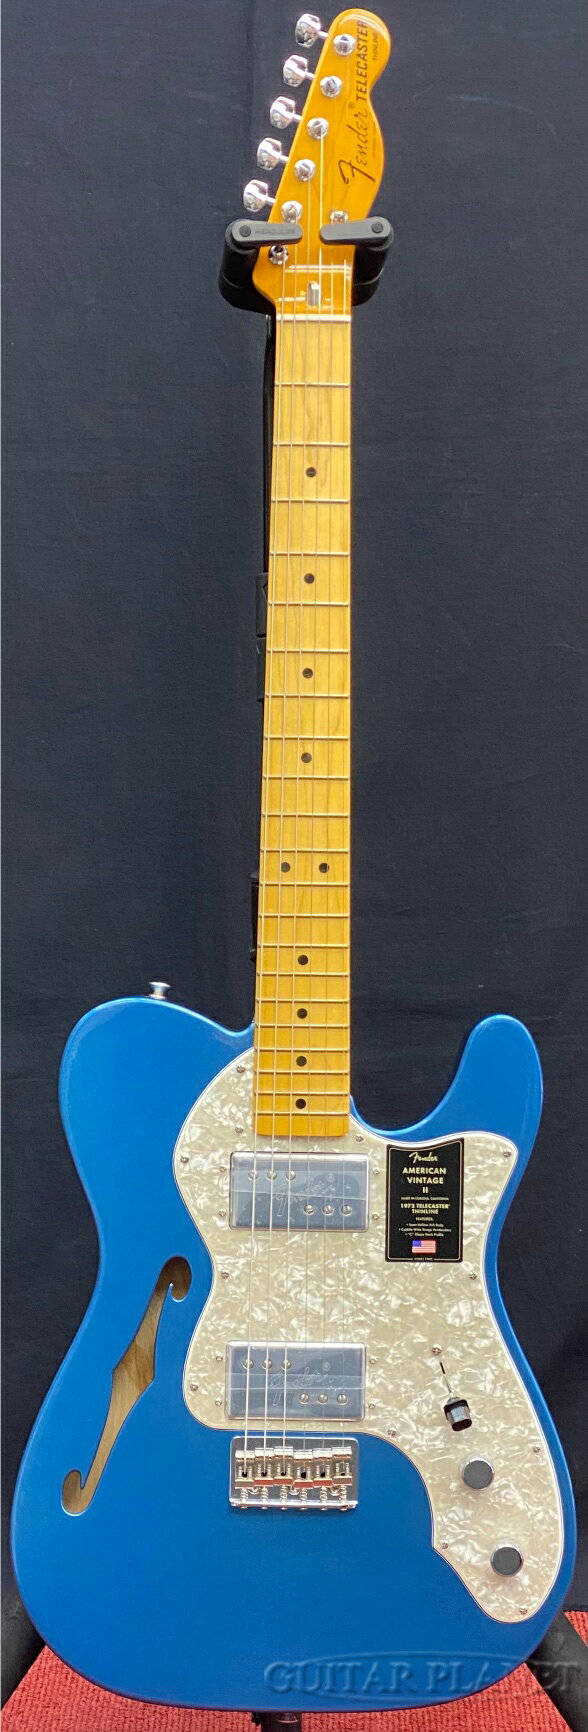 Fender American Vintage II 1972 Telecaster Thinline -Lake Placid Blue/Maple-【V14138】【3.56kg】[フェンダー][アメリカンヴィンテージ][Telecaster,テレキャスター][ブルー,青][Electric Guitar,エレキギター]